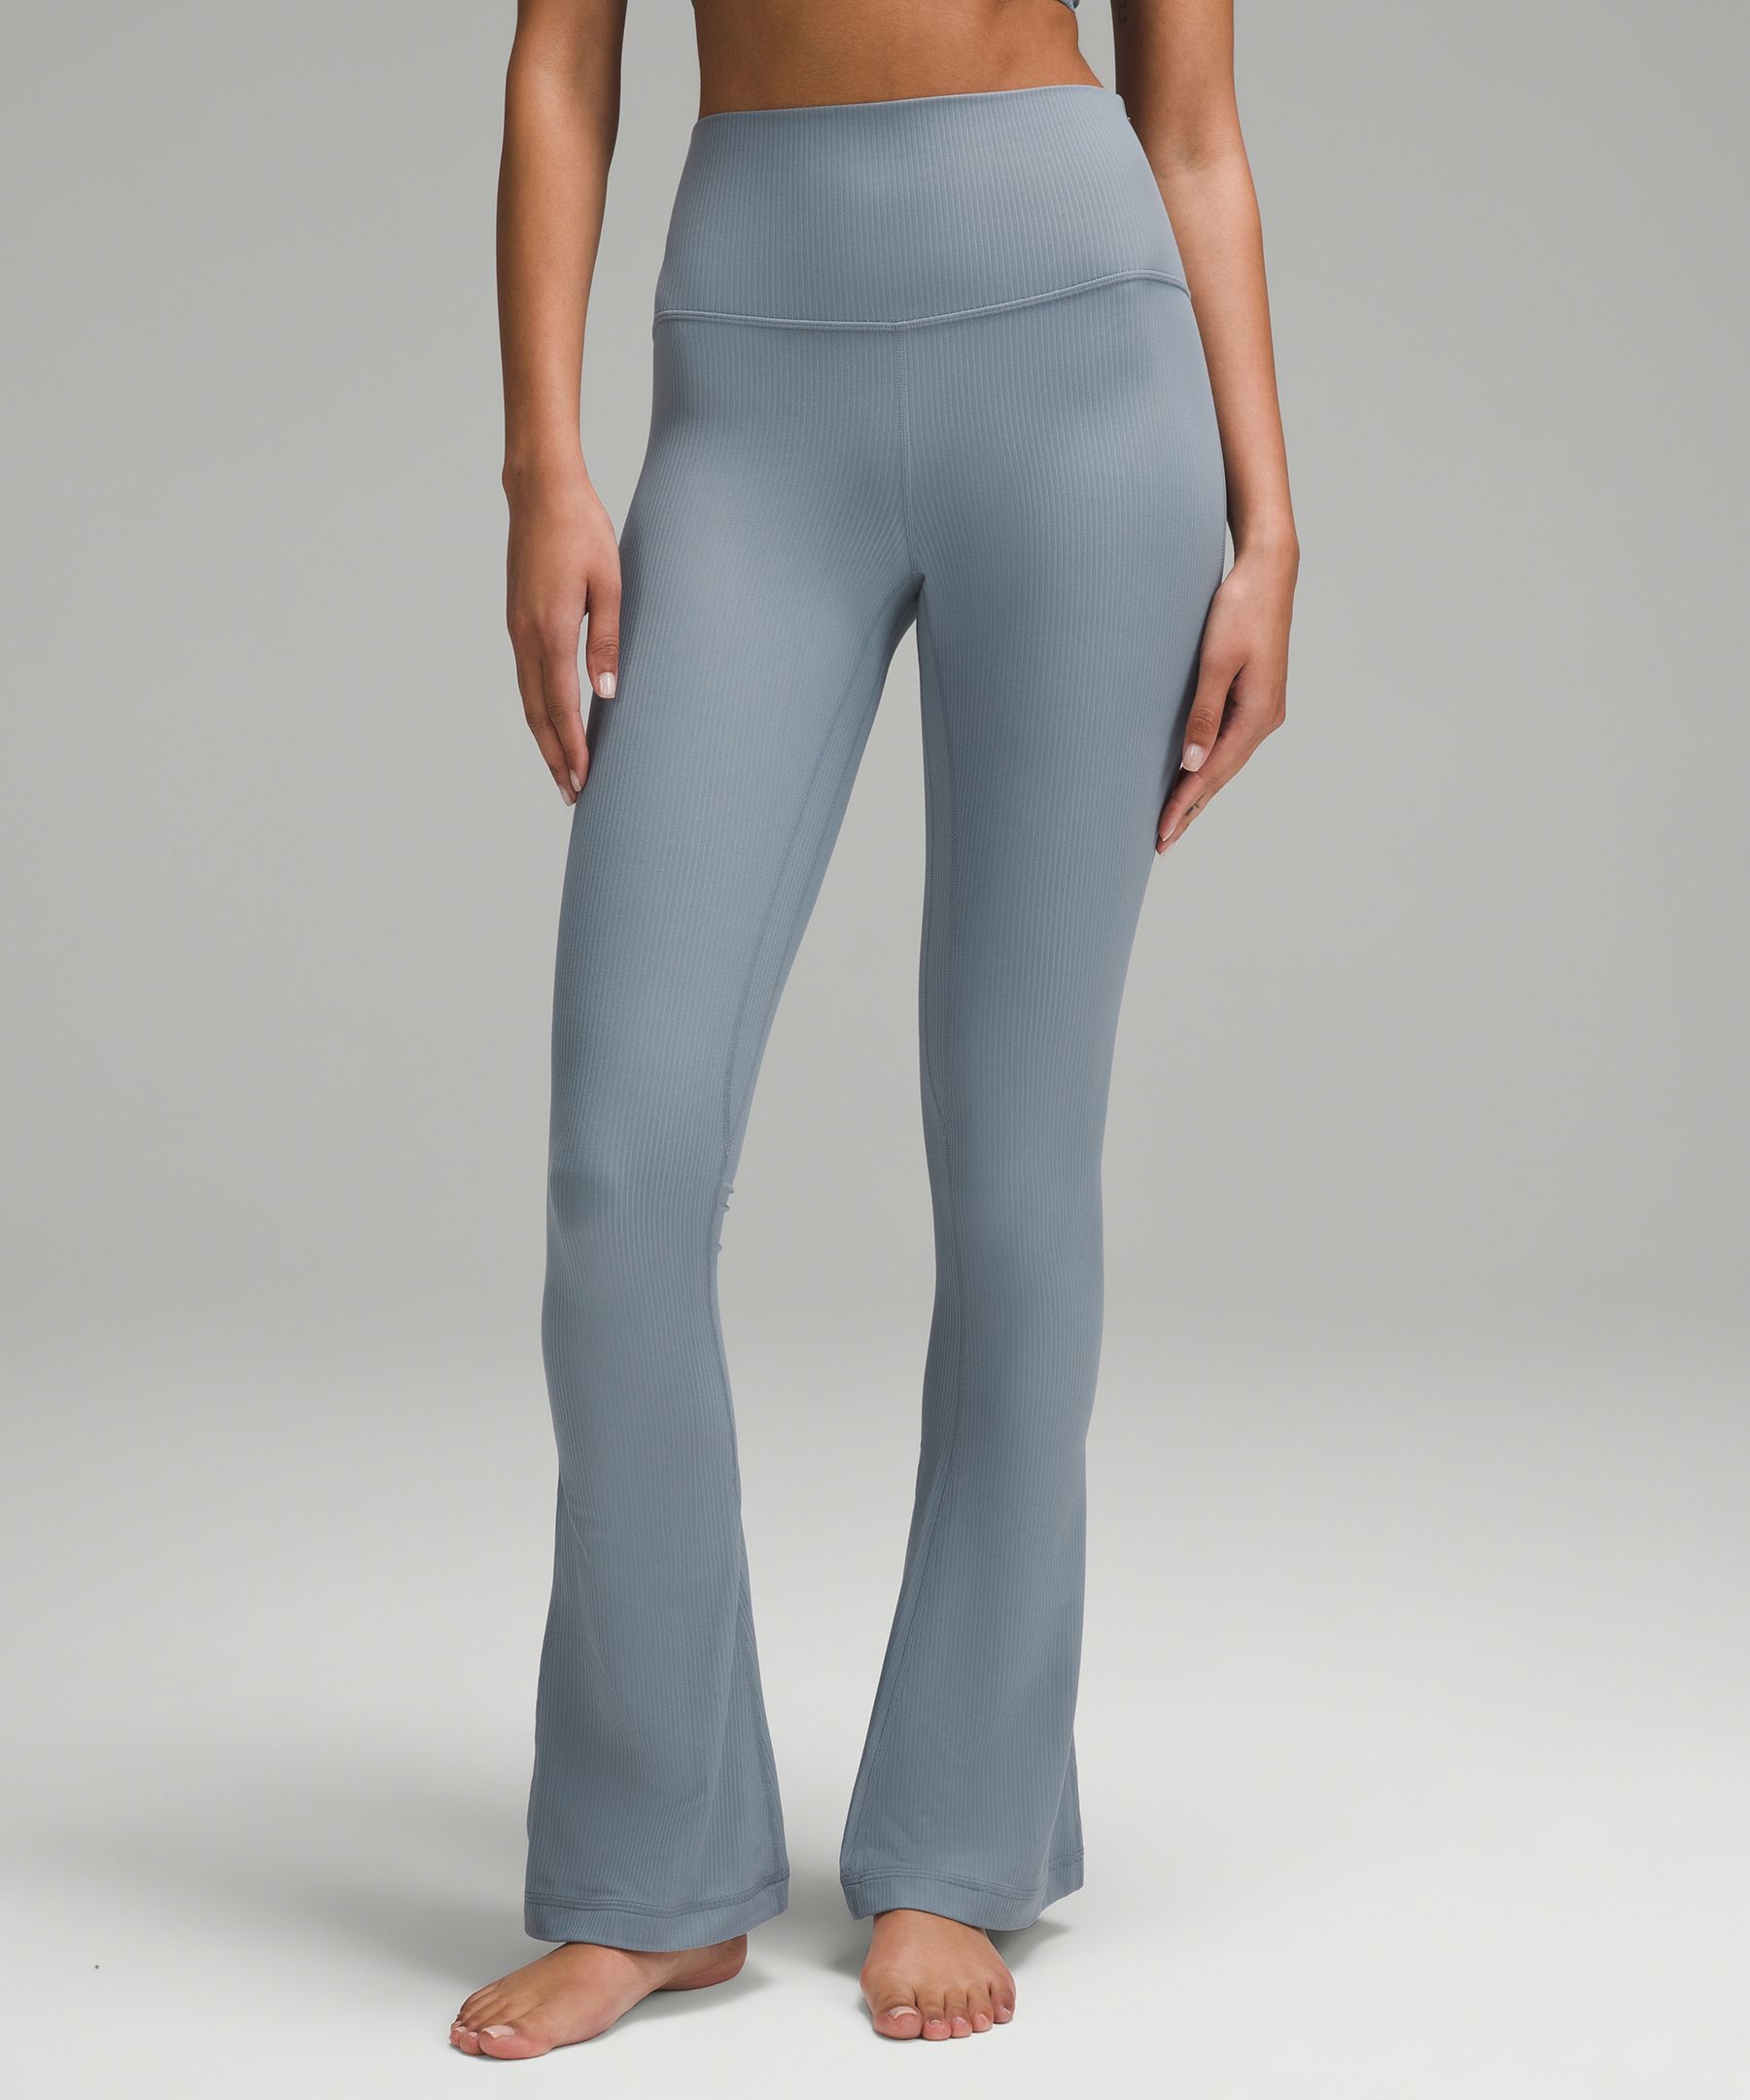 If you are a tall girl, you NEED these pants… thank me later 🤌🏻 #chr, lululemon  mini flare